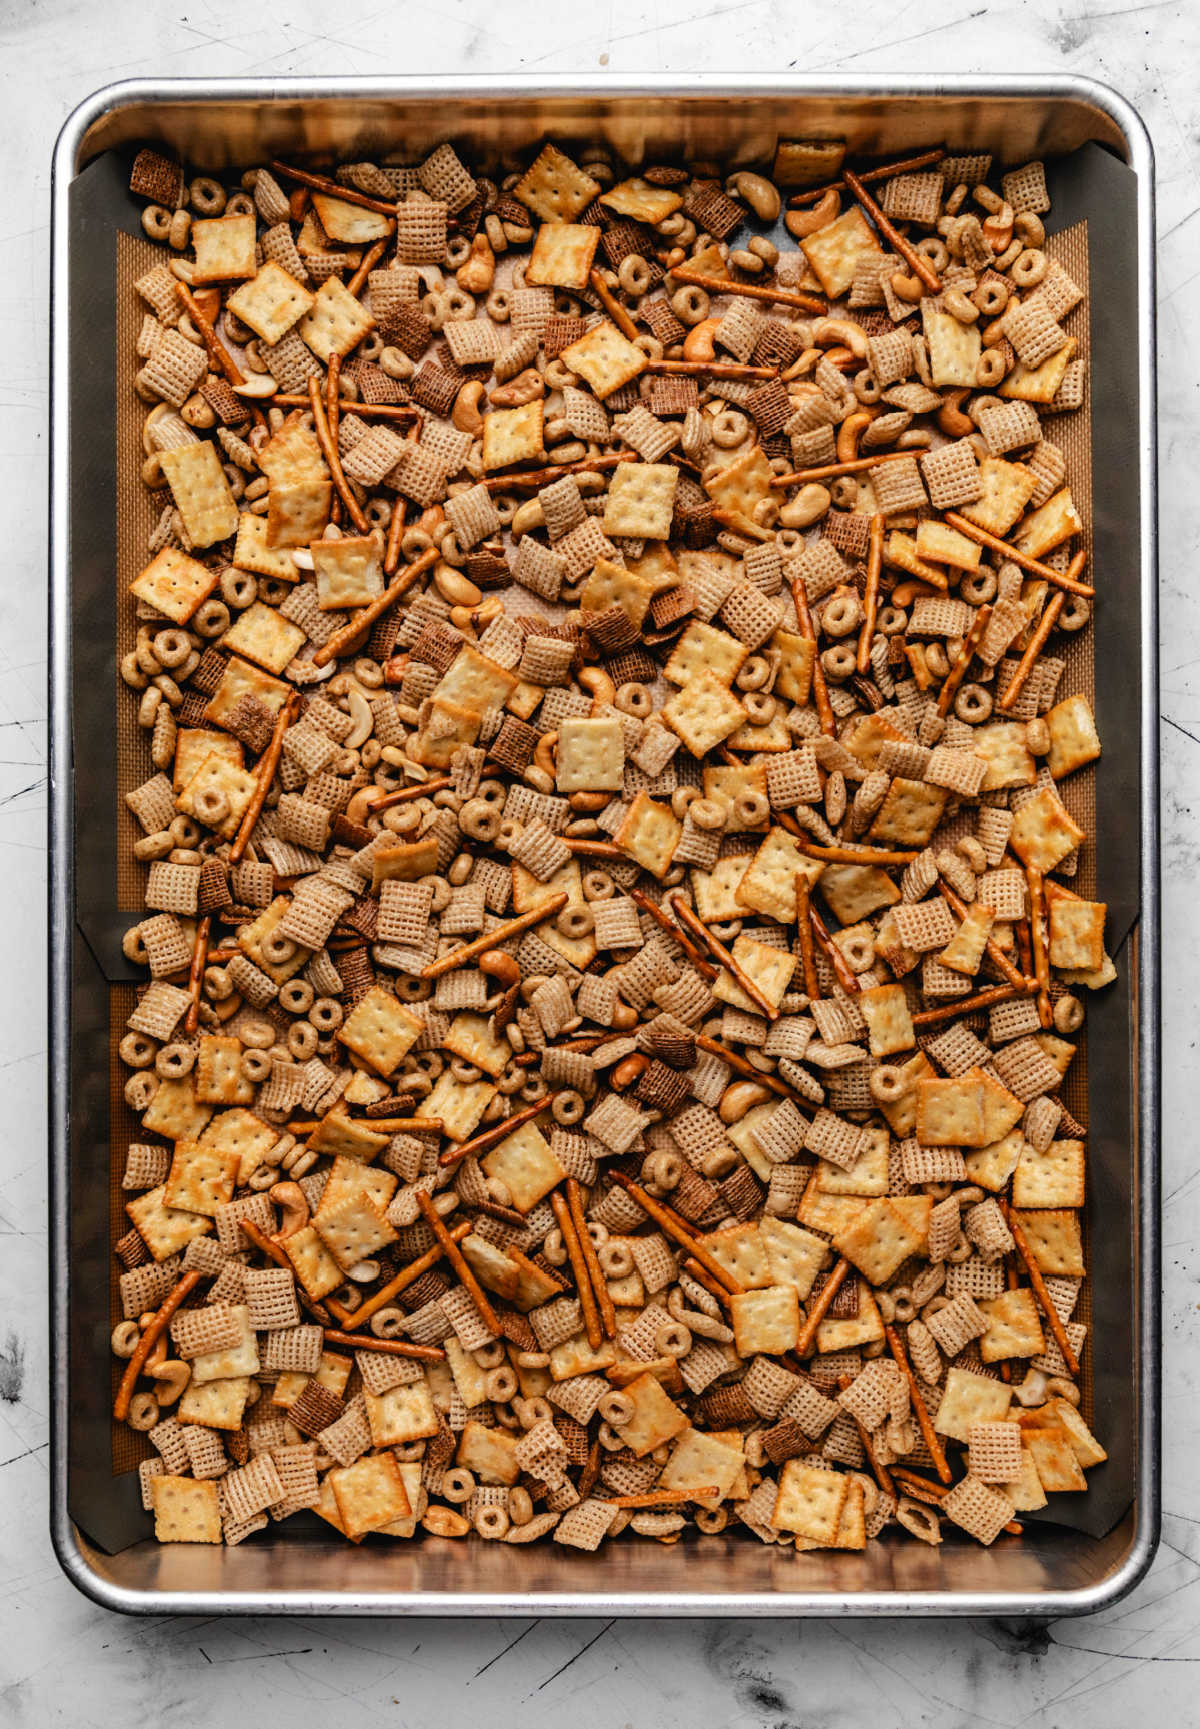 A tray of unbaked Chex Mix.